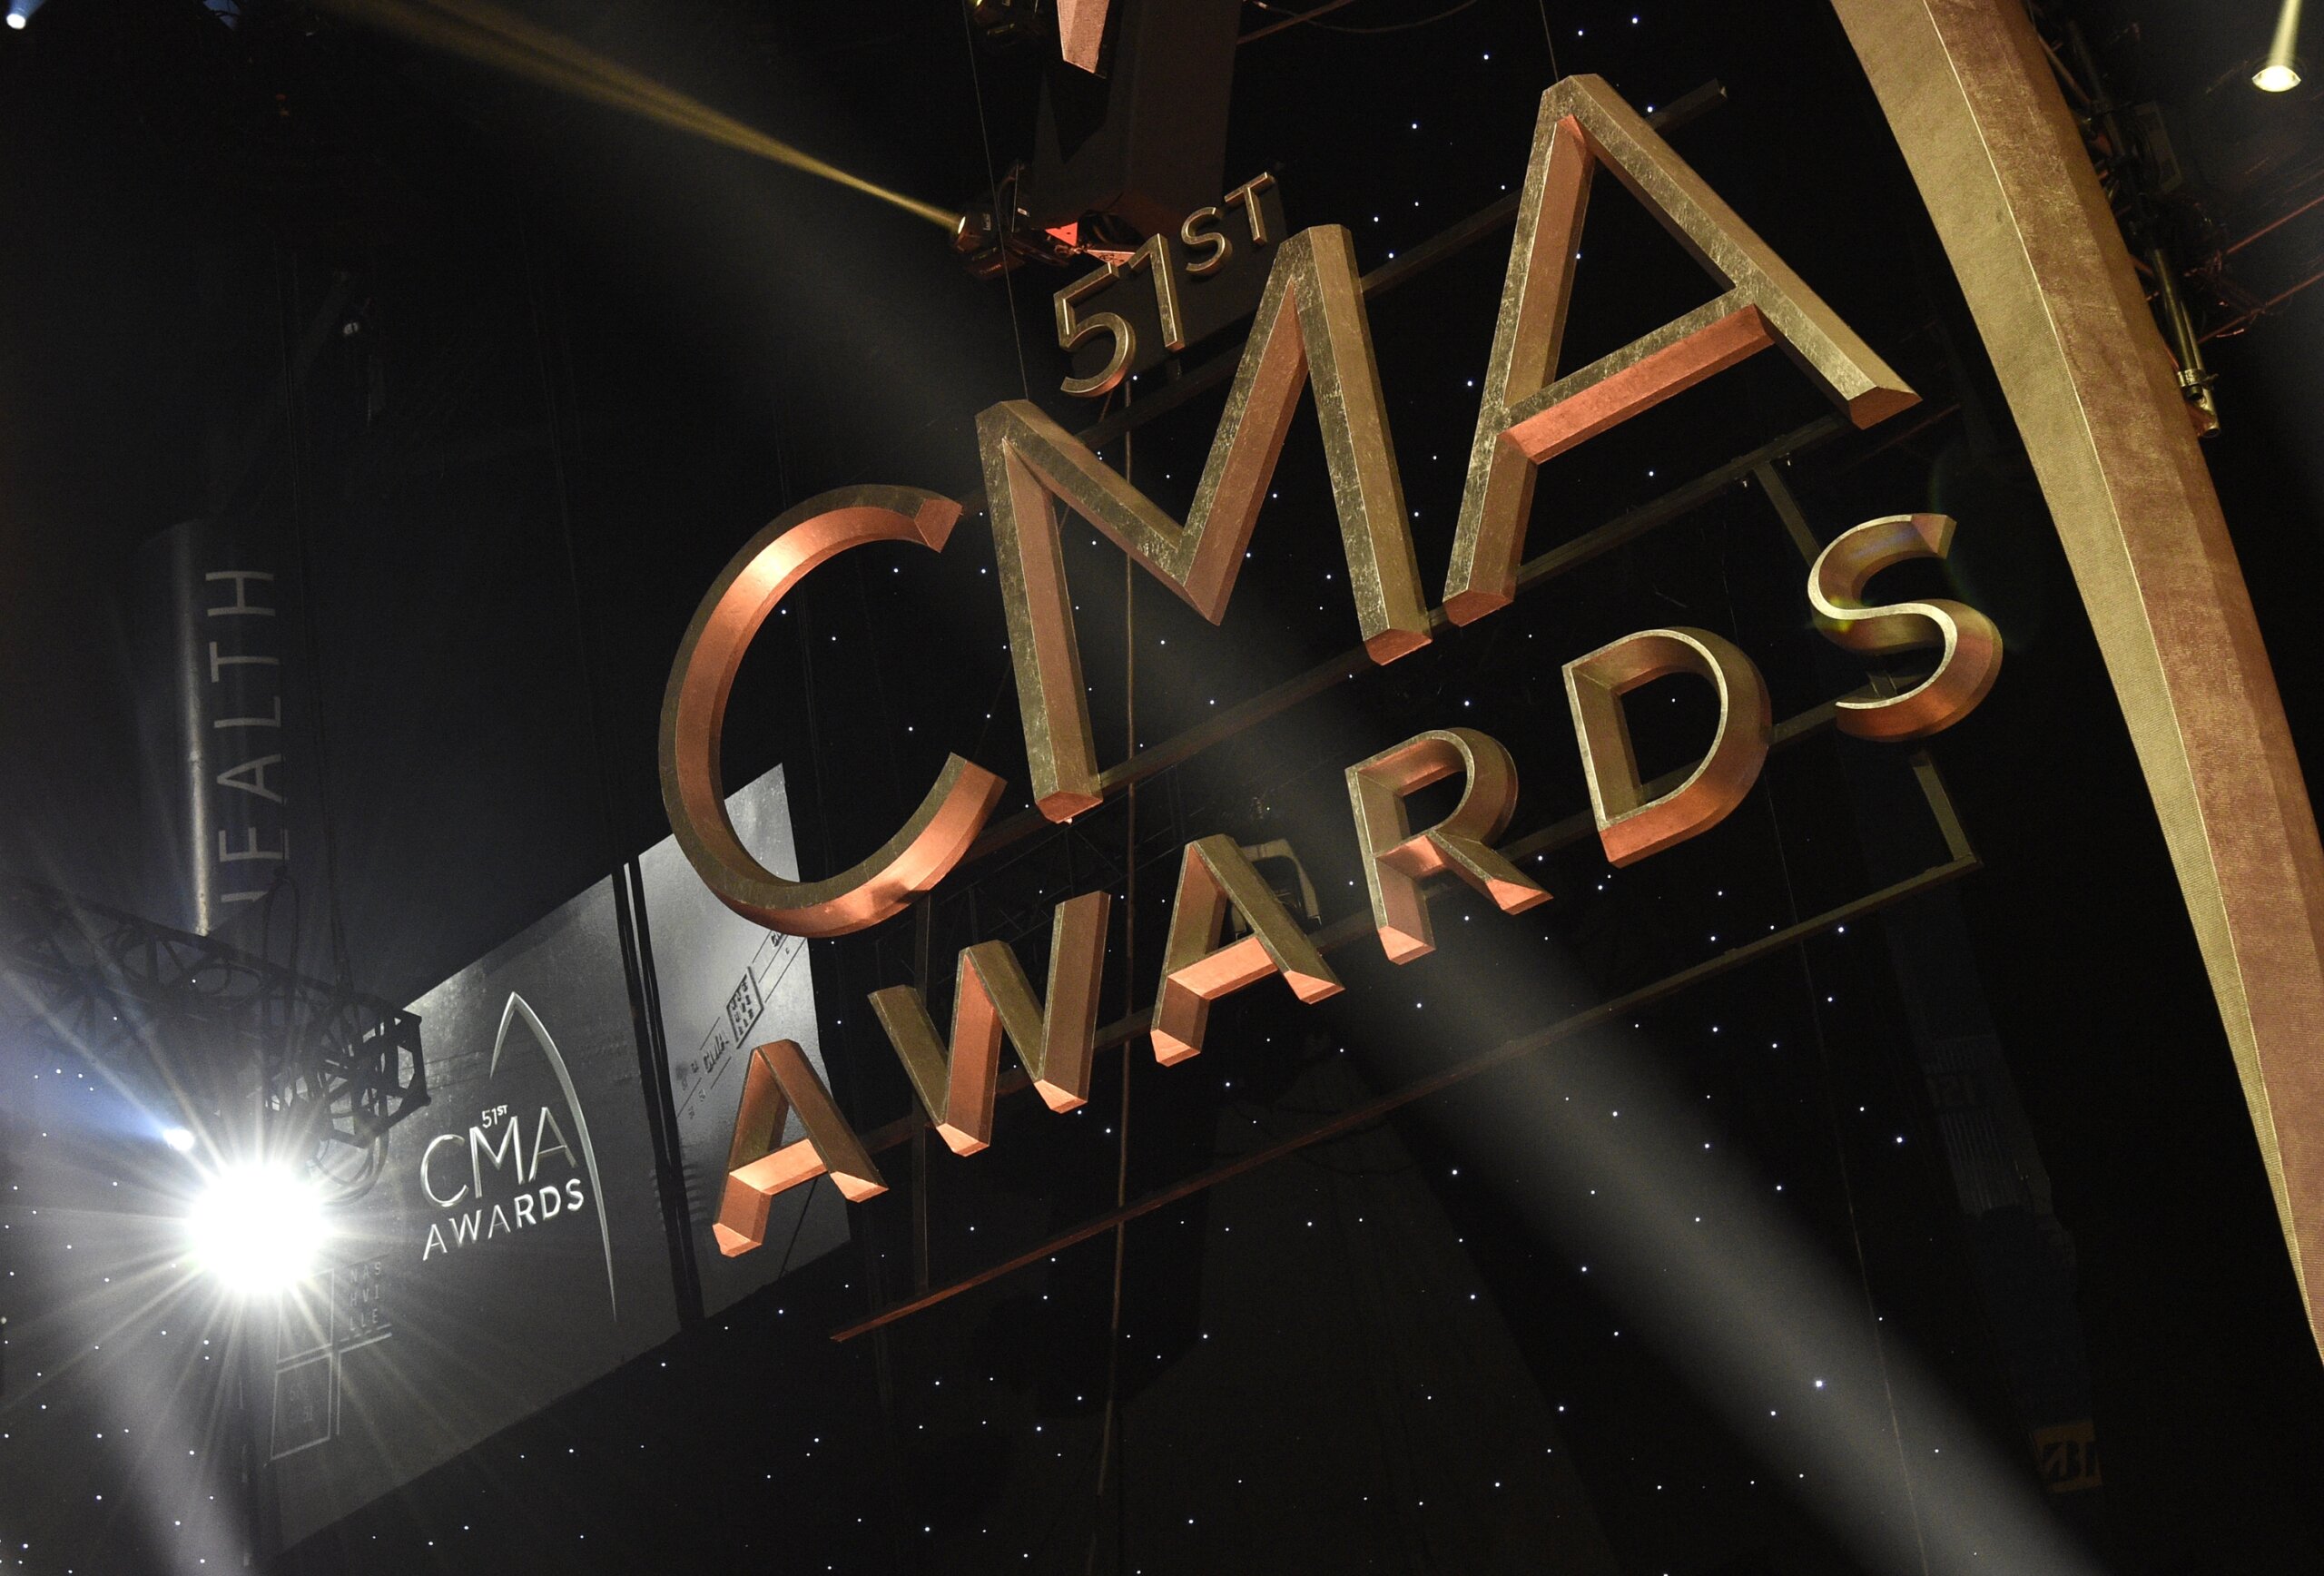 CMA Awards will pay tribute to Jimmy Buffett during a show hosted by